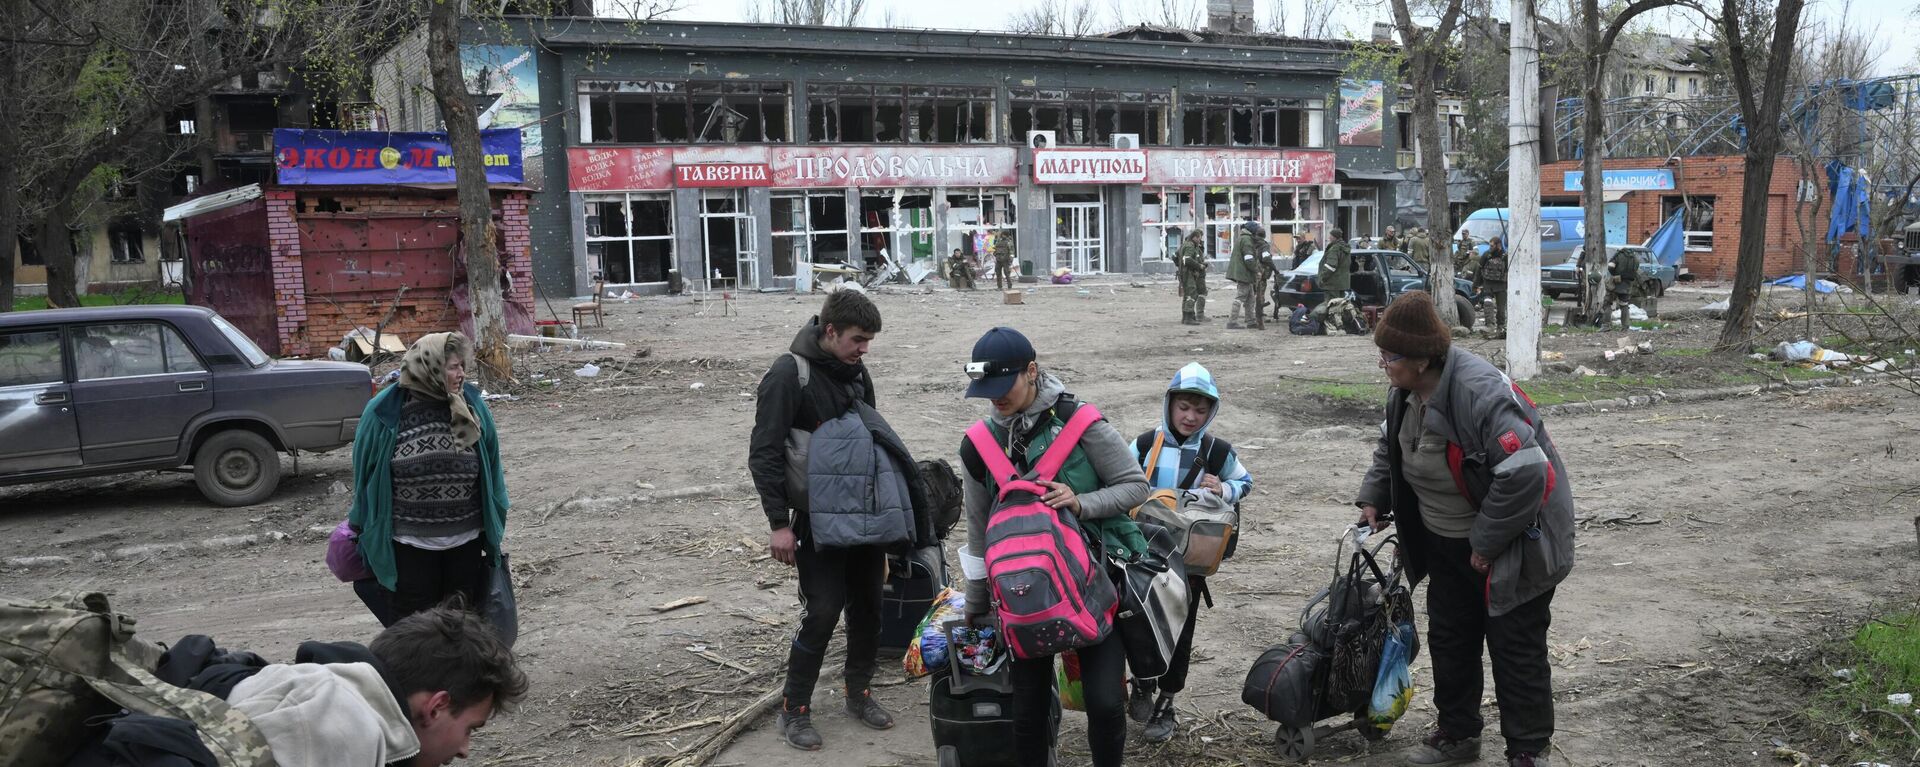 Residents carry their personal belongings as they leave Mariupol, that came under control of the Donetsk People's Republic, DPR. - Sputnik International, 1920, 22.04.2022